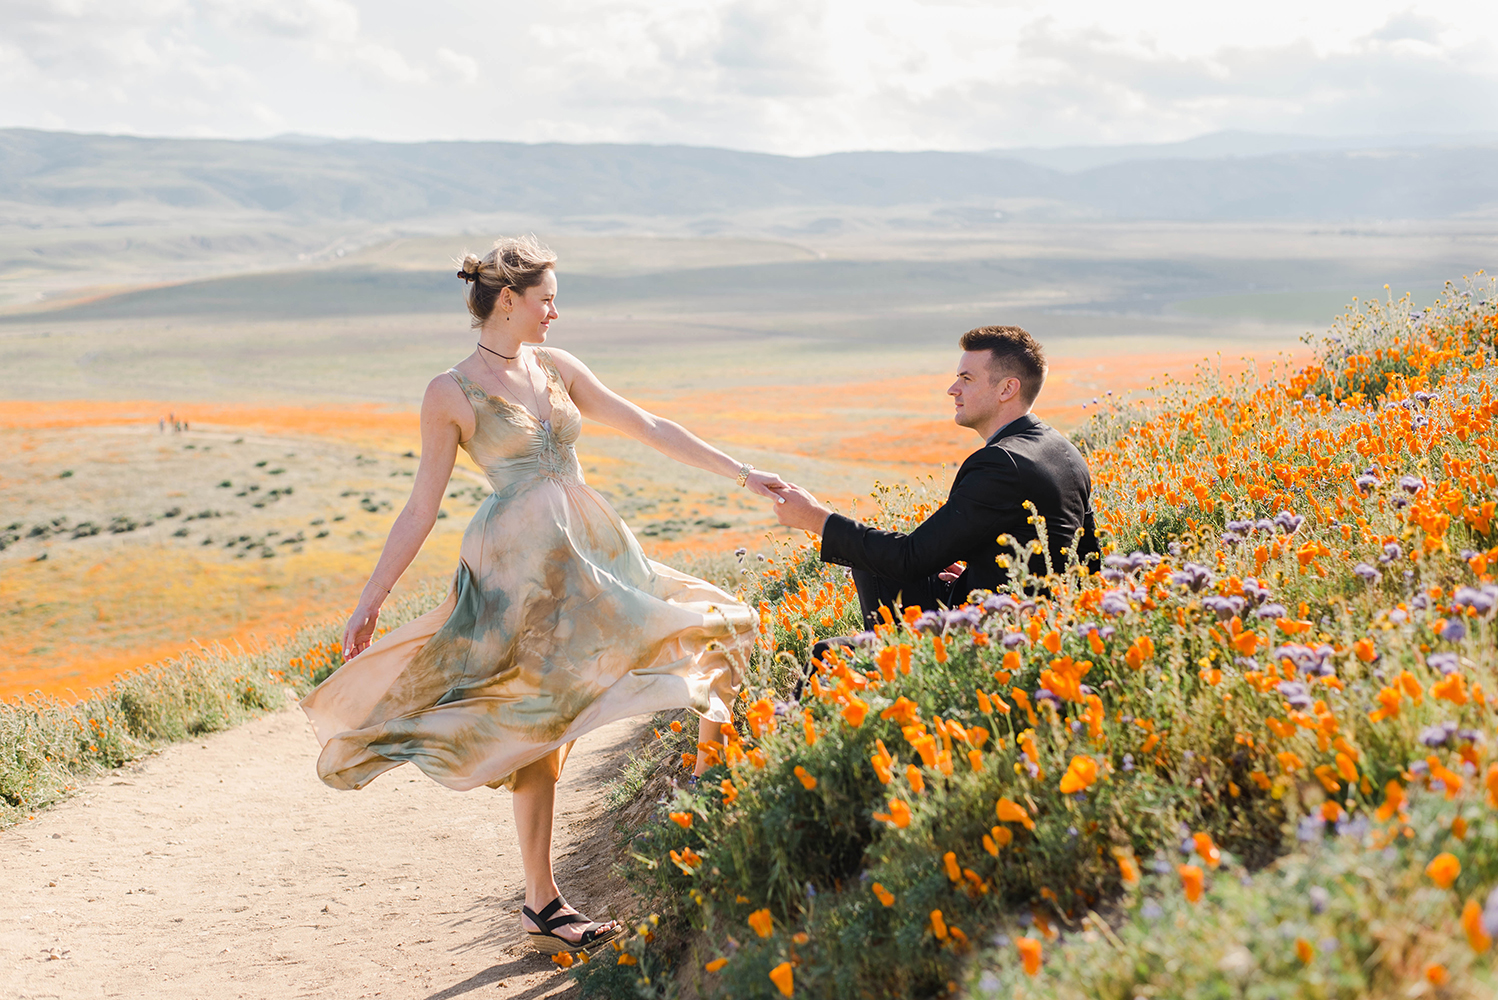 A man sits in a field of wild flowers as a woman holds his hand and stands.